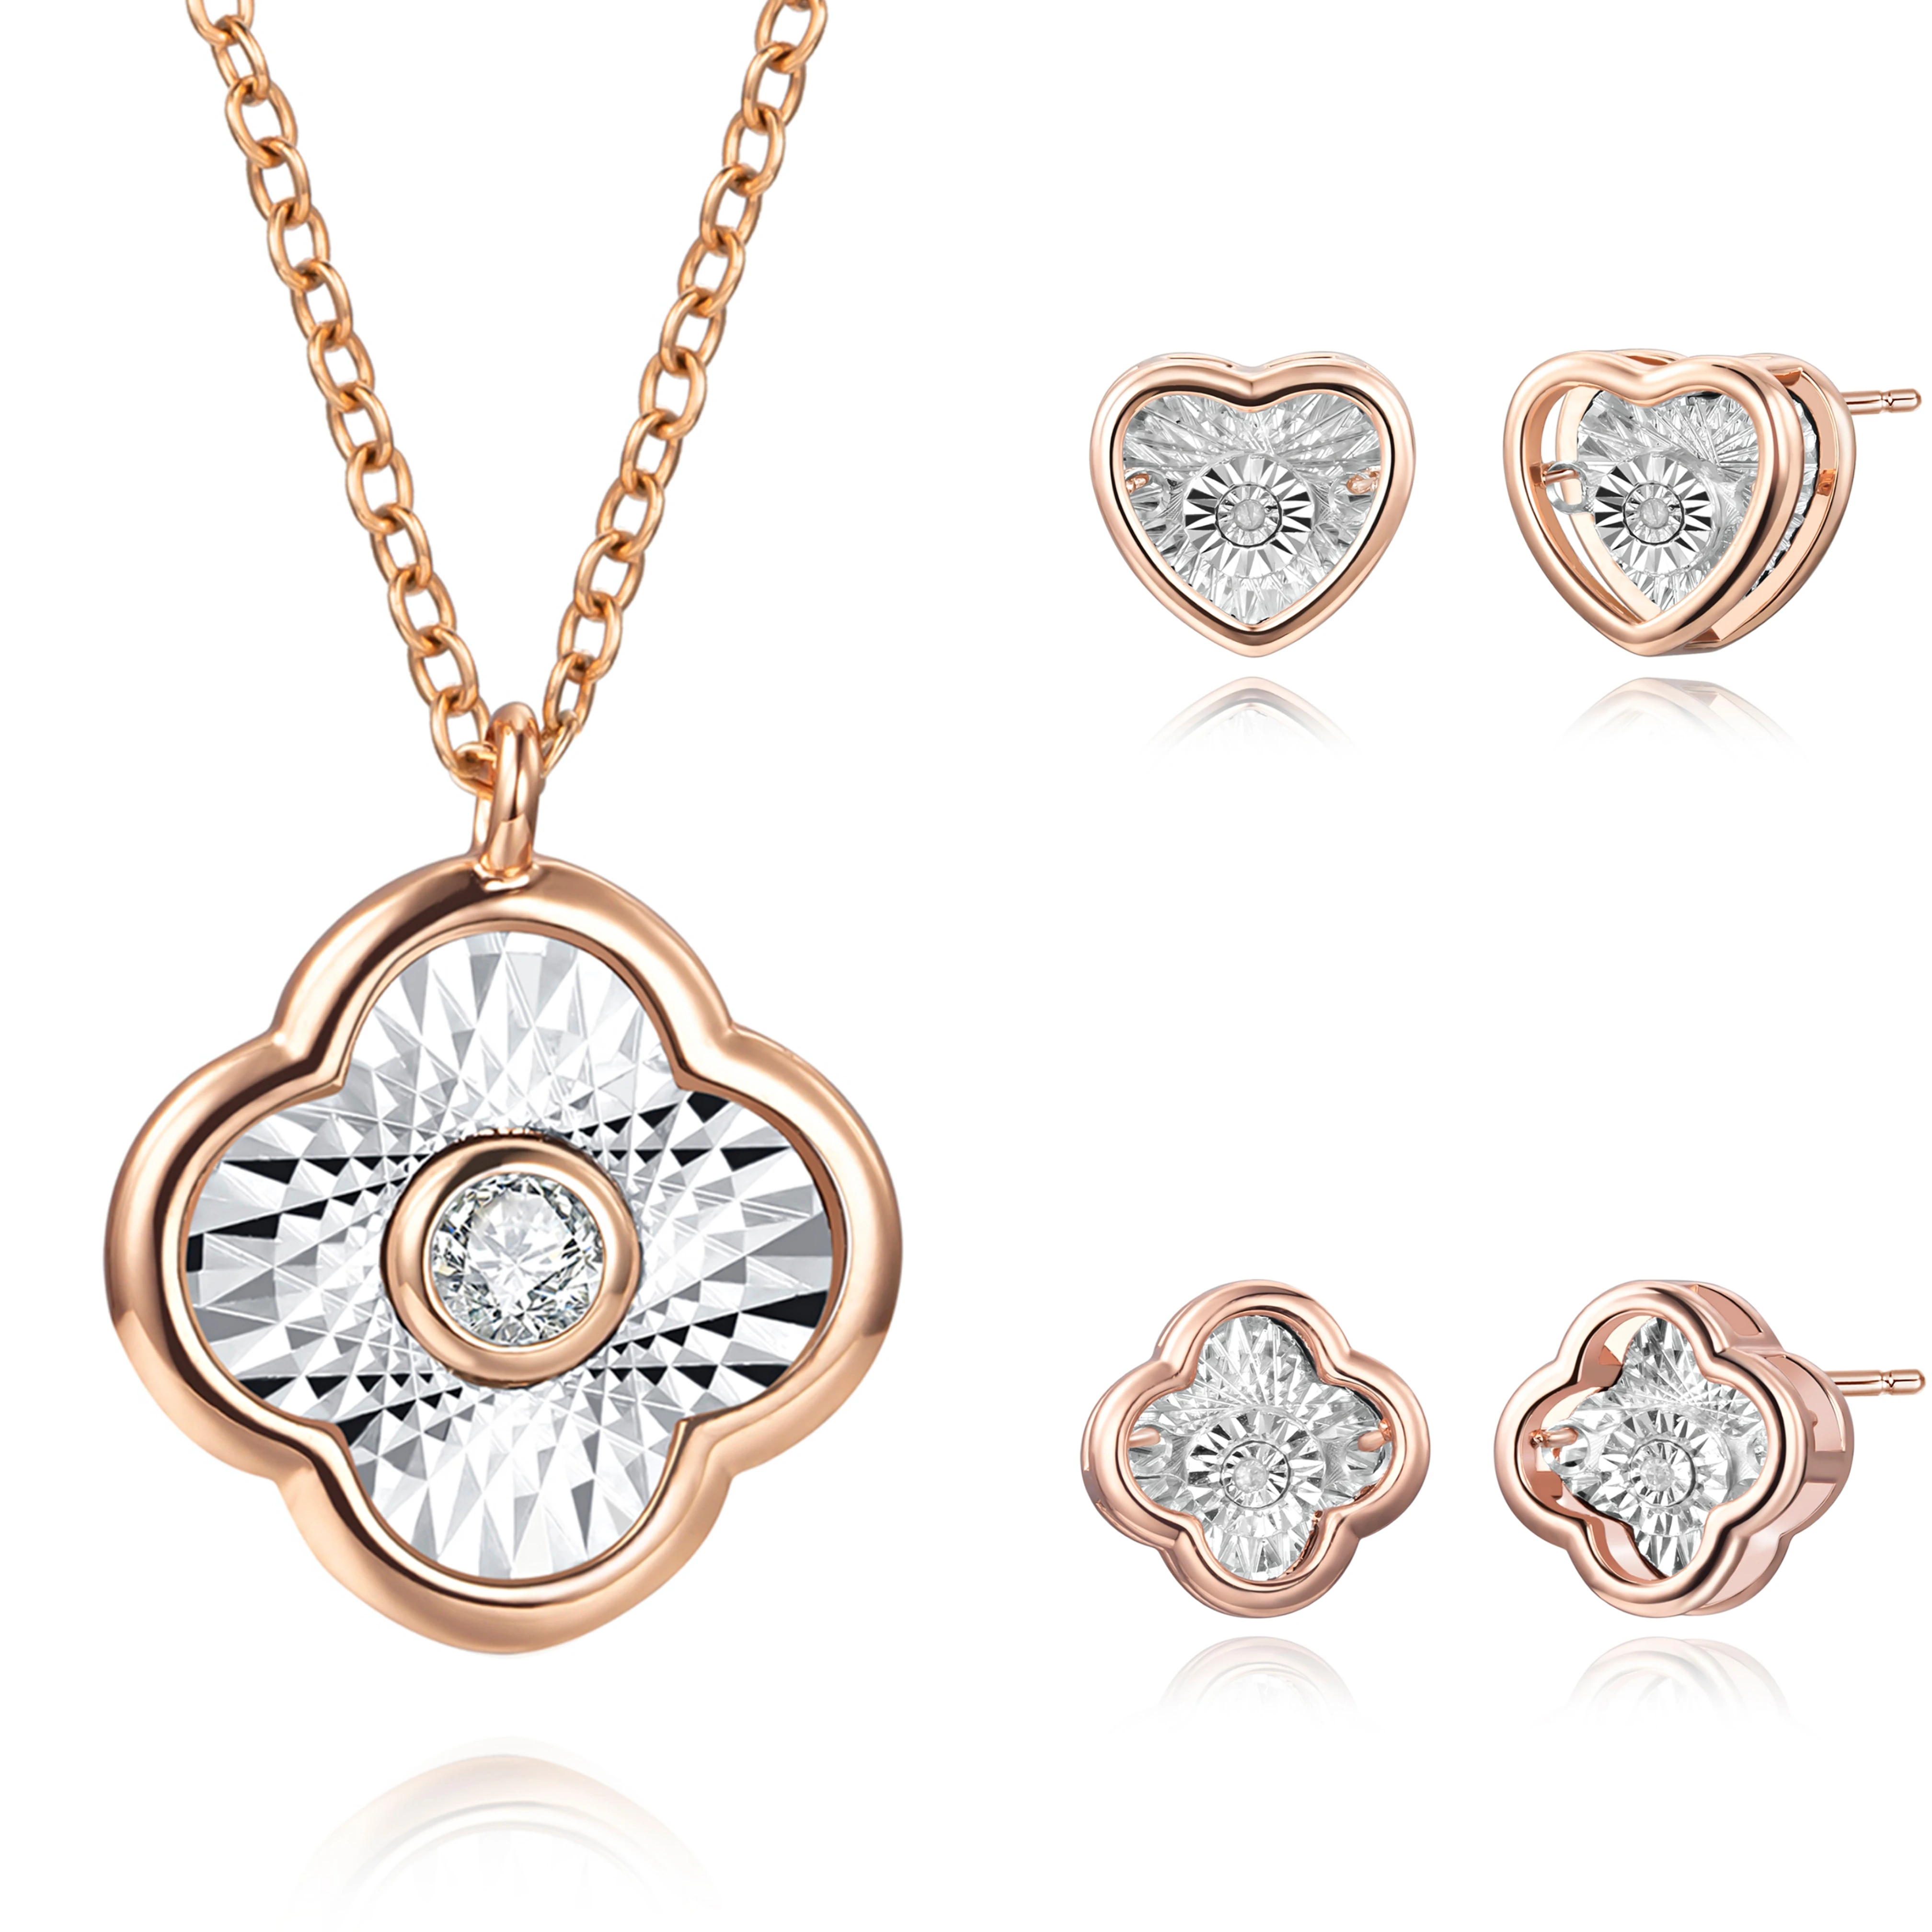 Wholesale Fashion Design Stainless Steel Rose Gold Plated Jewelry